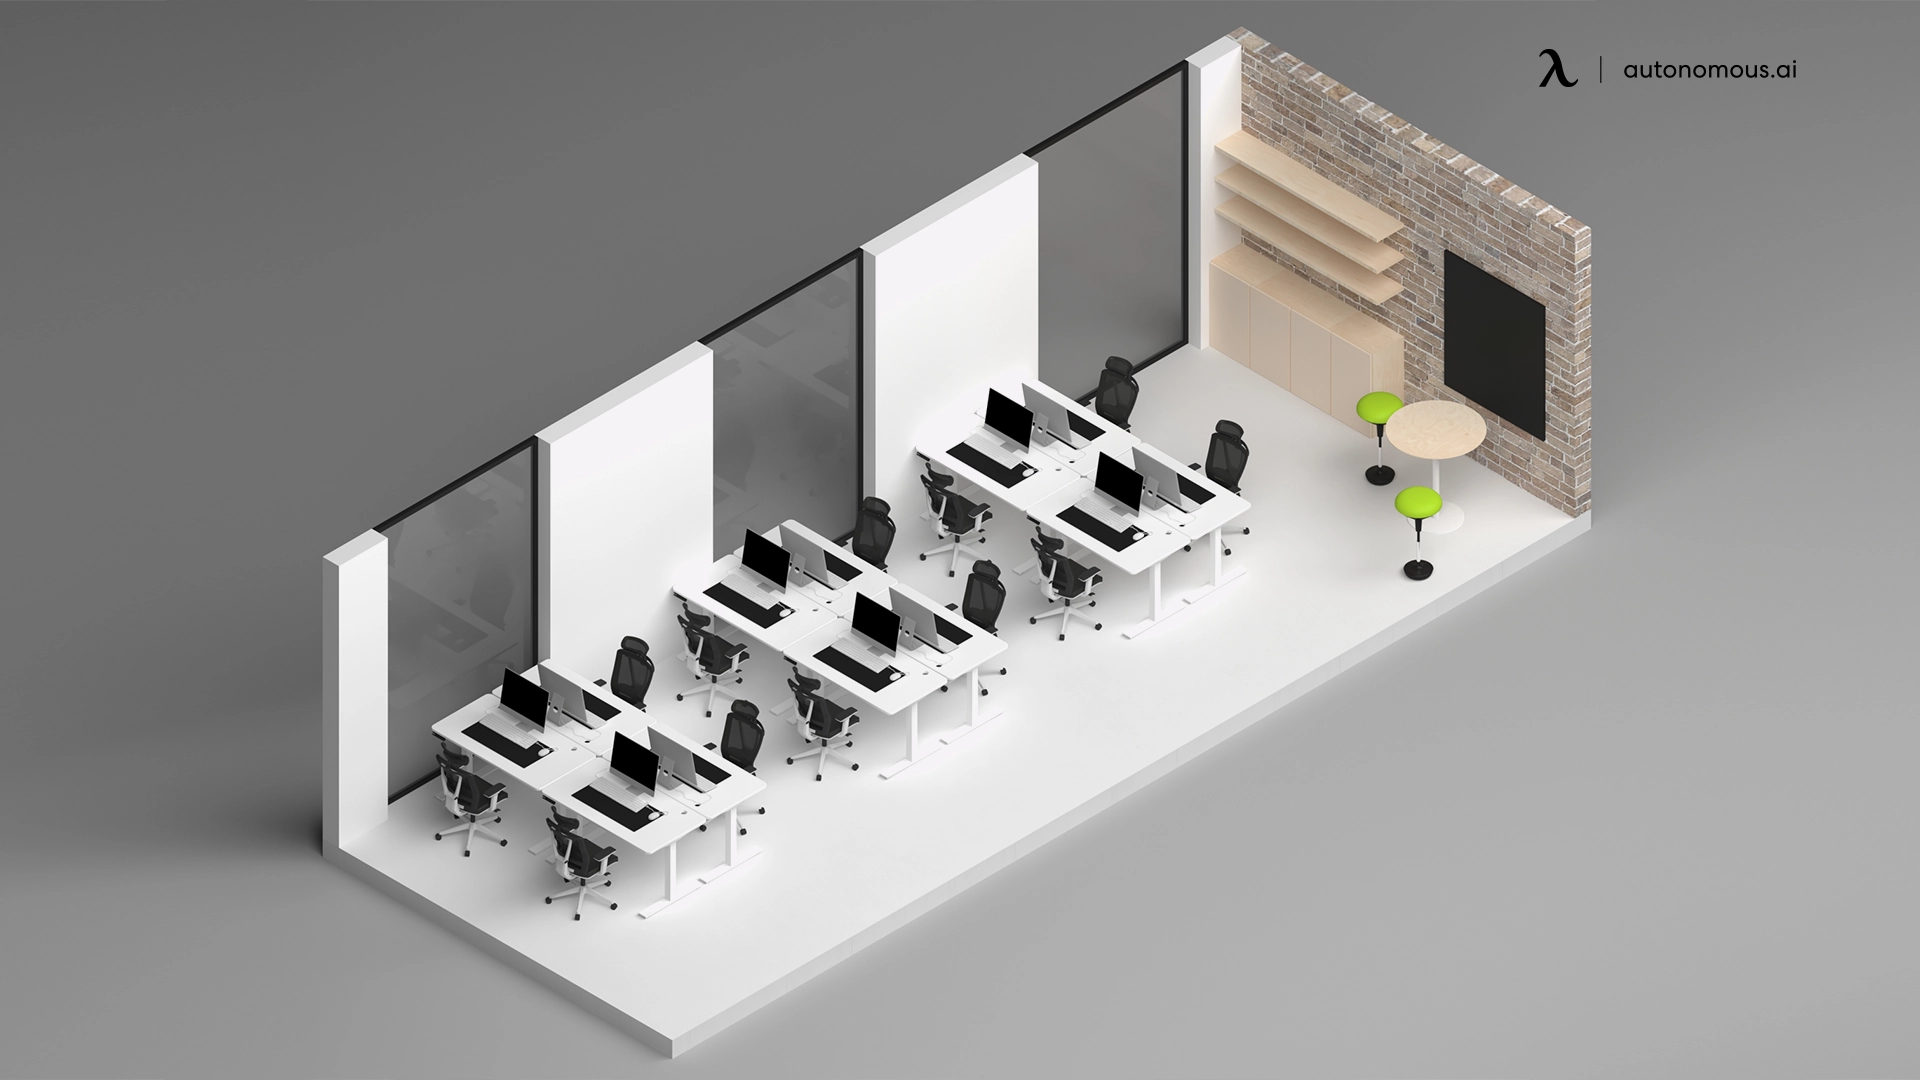 What About the Free Office Design Service?